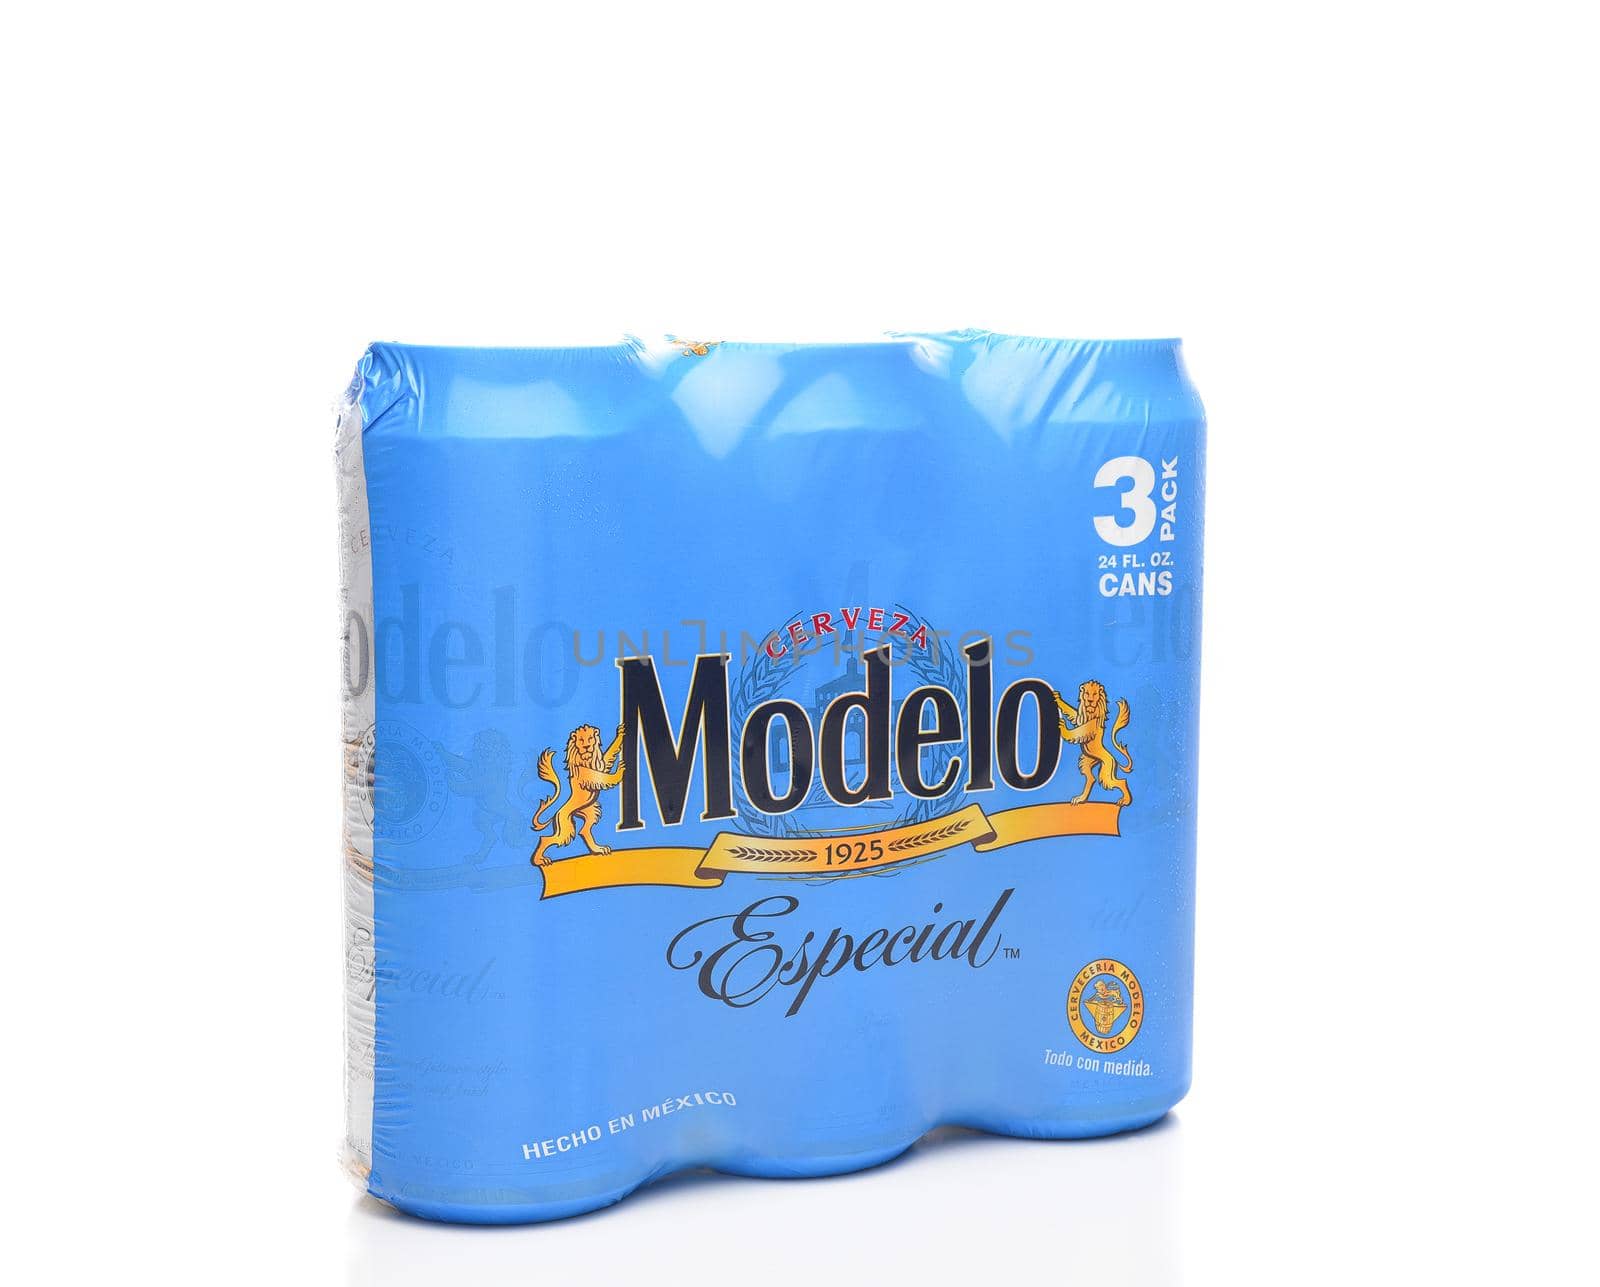 IRVINE, CALIFORNIA - MARCH 21, 2018: 3 pack of Modelo Especial cans. First bottled in 1925, Modelo Especial is the number 2 imported beer in the U.S. by case sales.